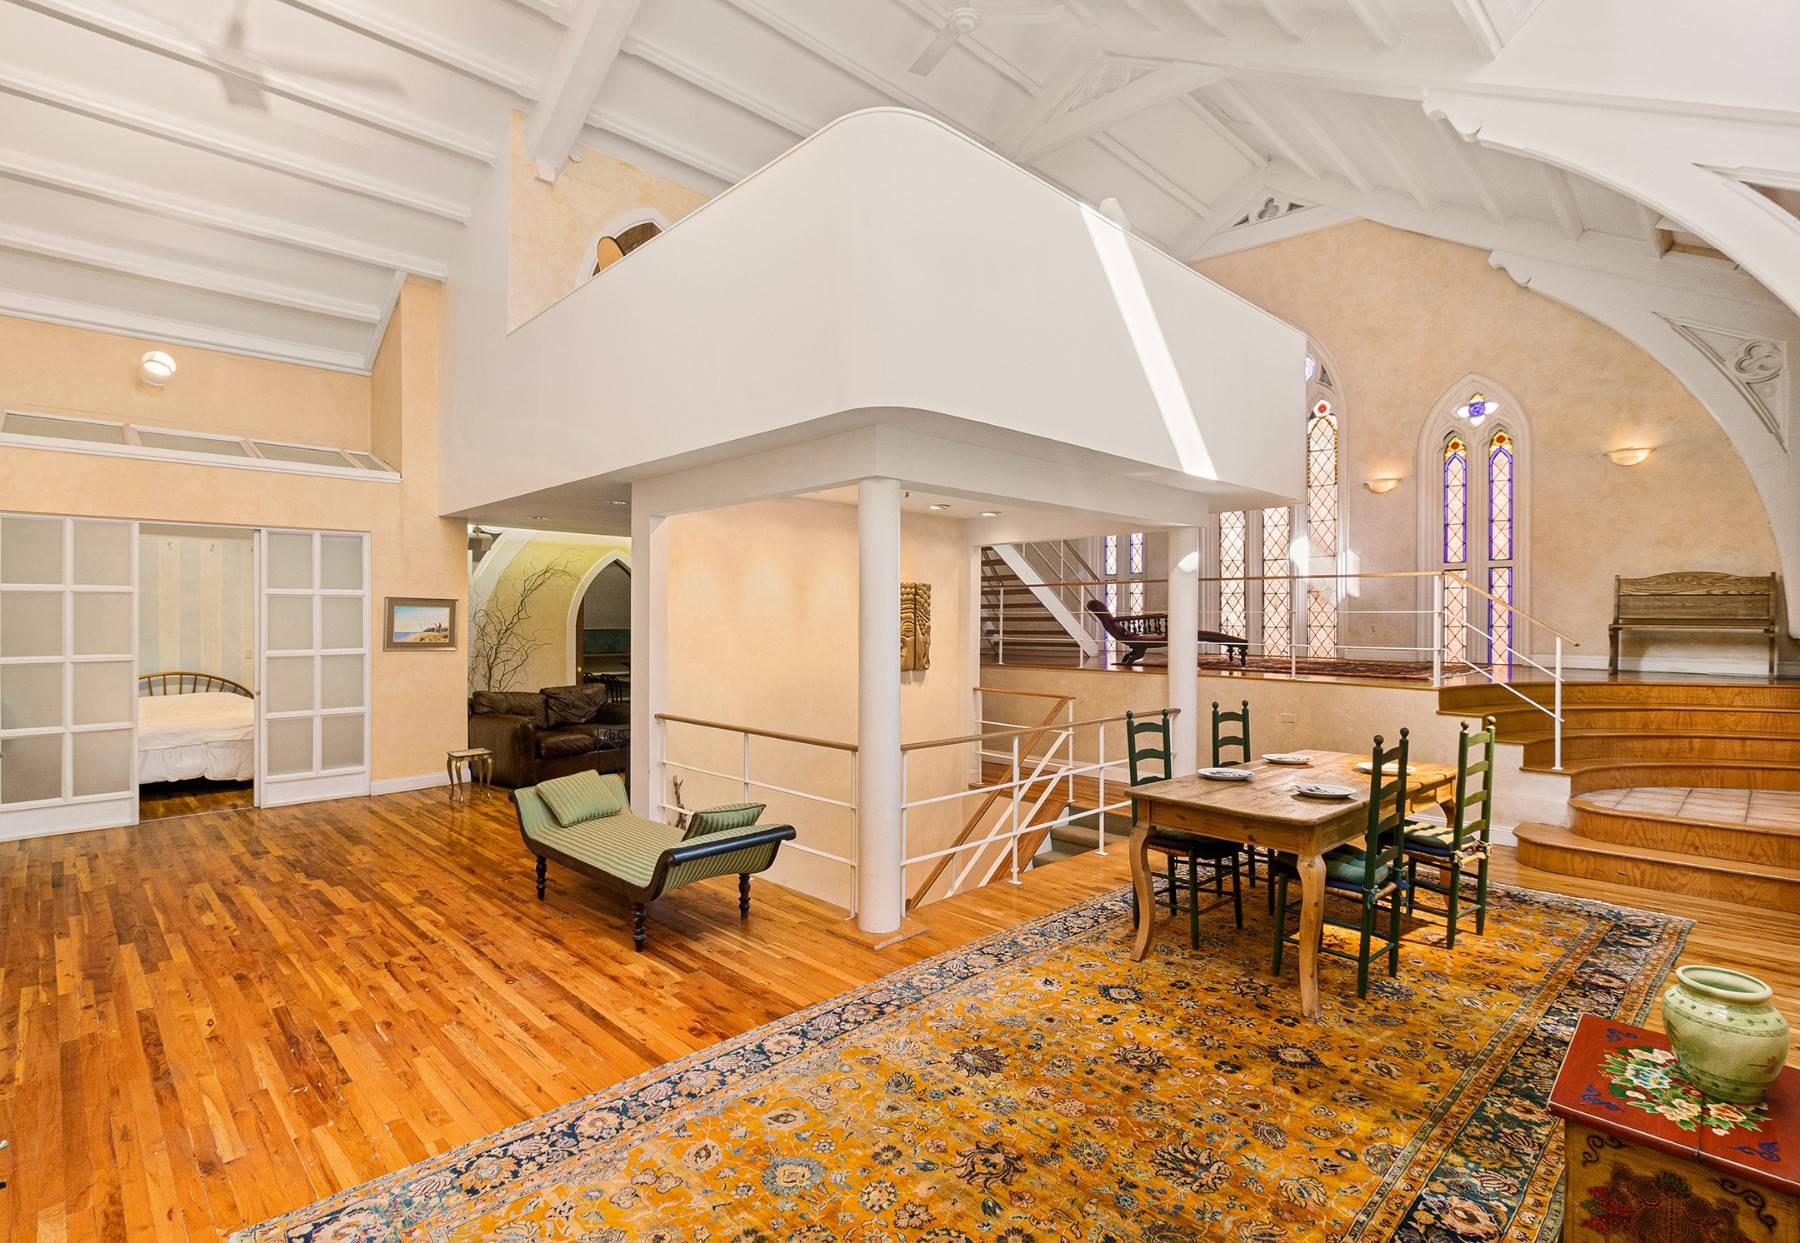 This dramatic, totally unique loft located in a converted gothic revival church circa 1850 offers enormous space approx.